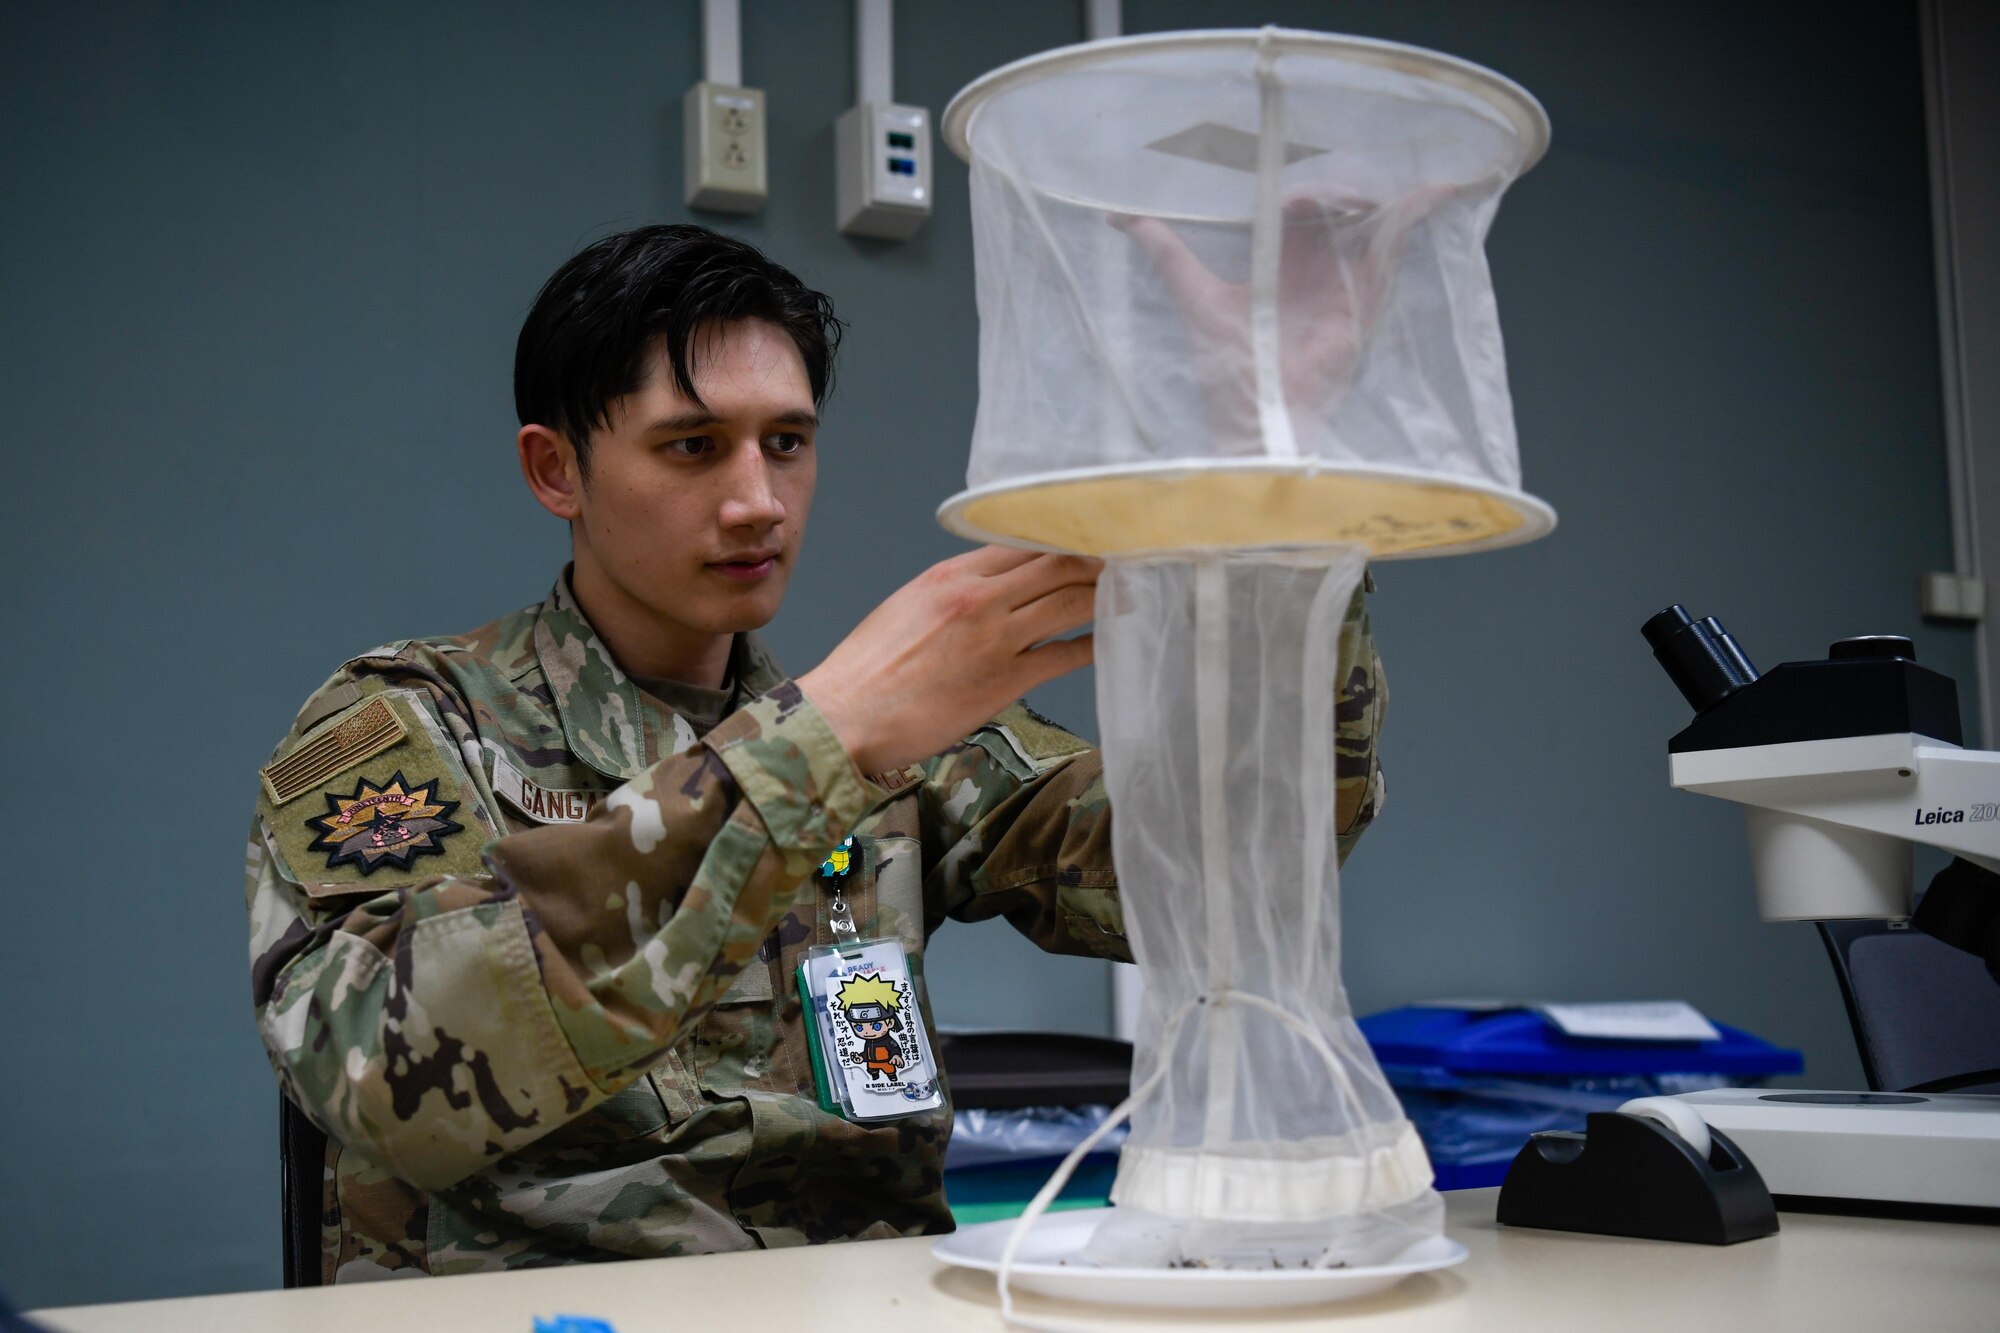 A service member empties a insect trap.